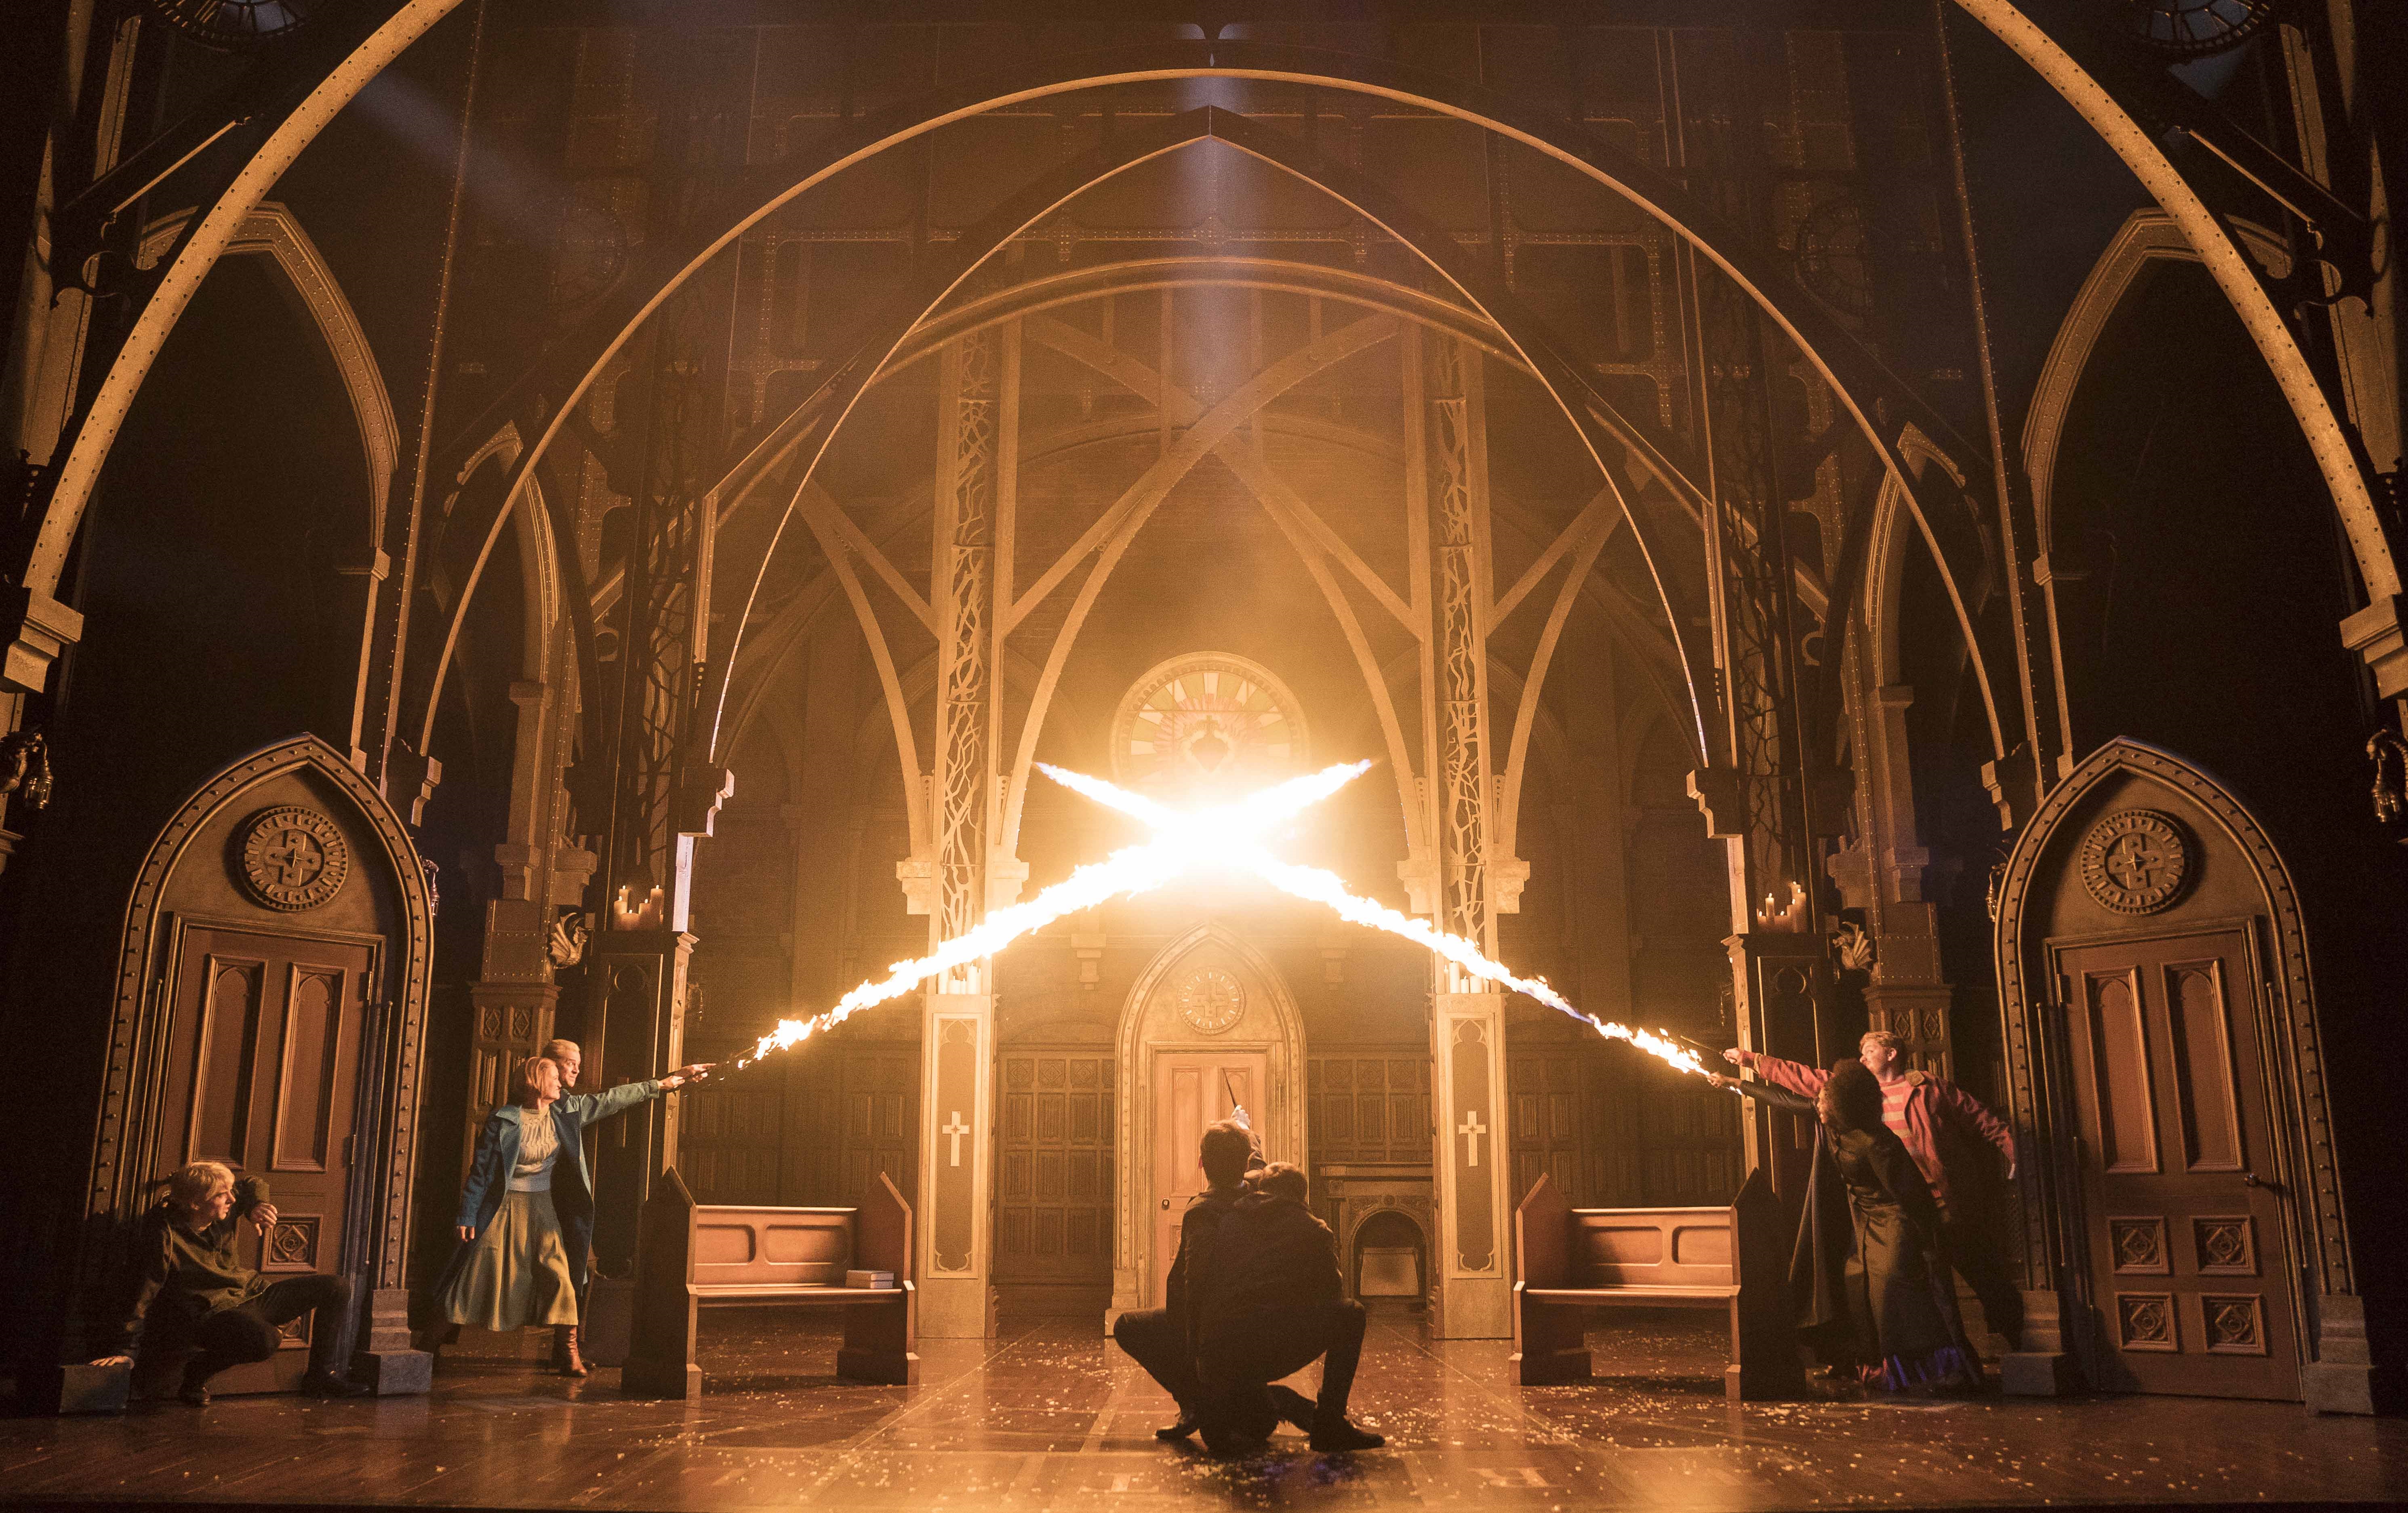 Wands ignite in a scene from "Harry Potter and the Cursed Child" San Francisco.